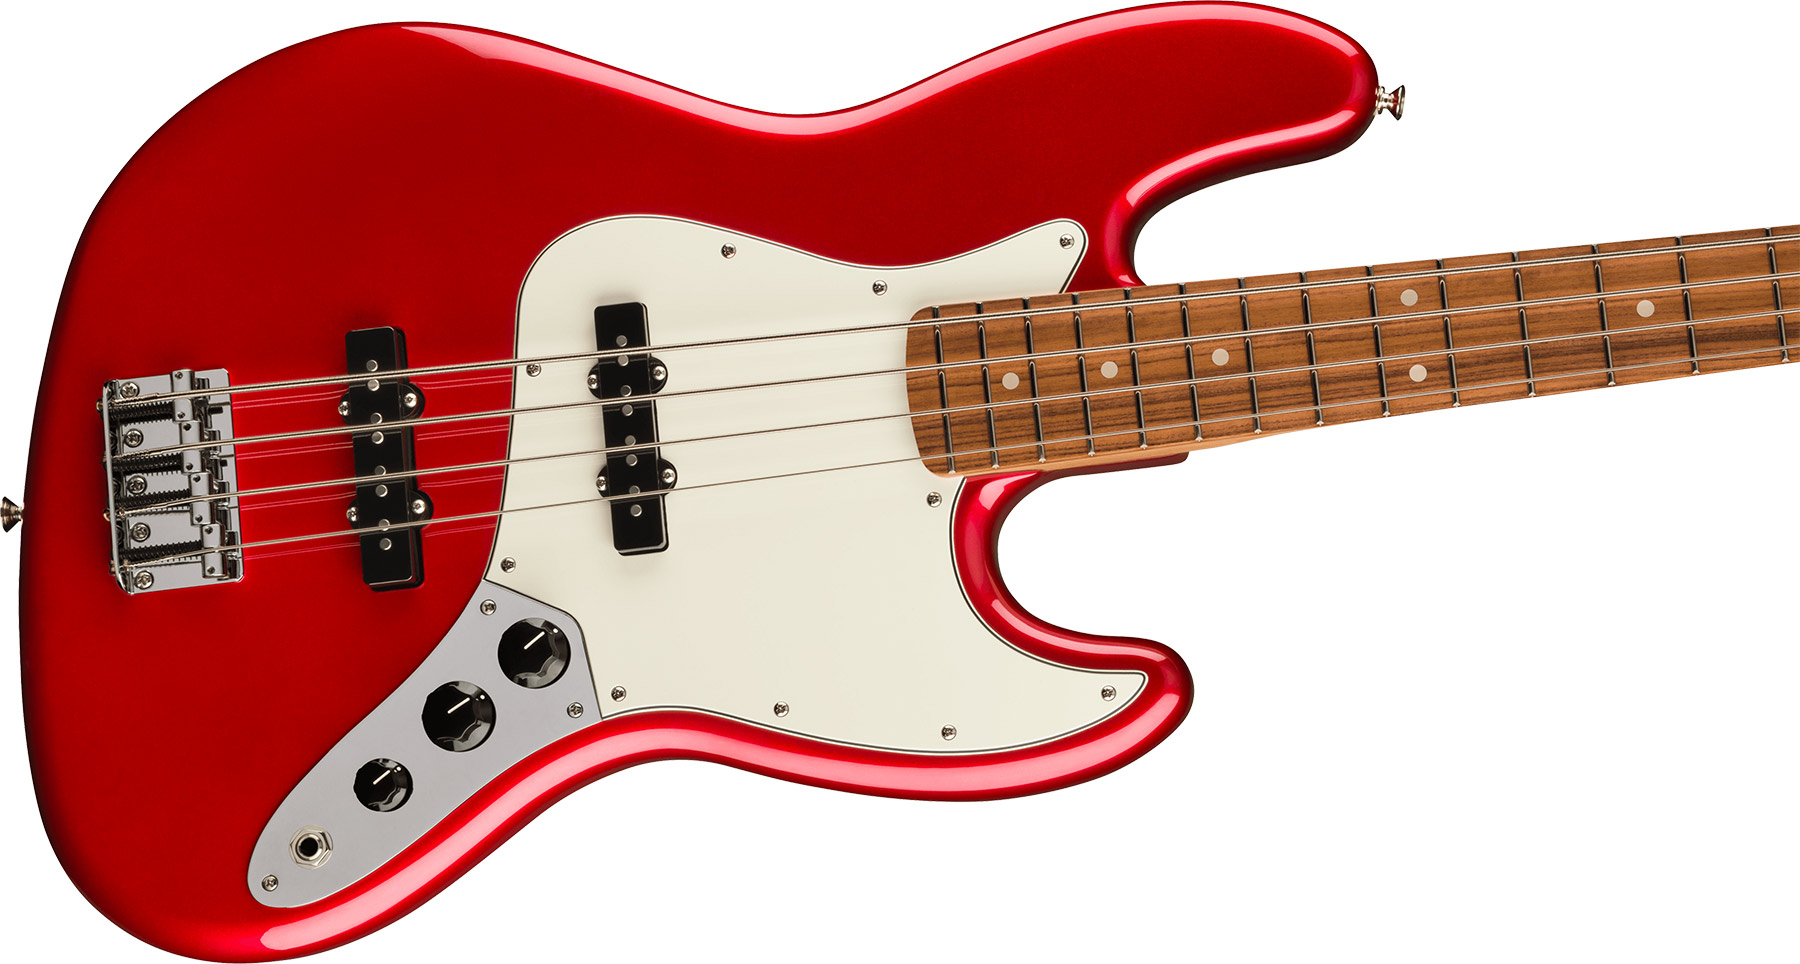 Fender Jazz Bass Player Mex 2023 Pf - Candy Apple Red - Solidbody E-bass - Variation 2